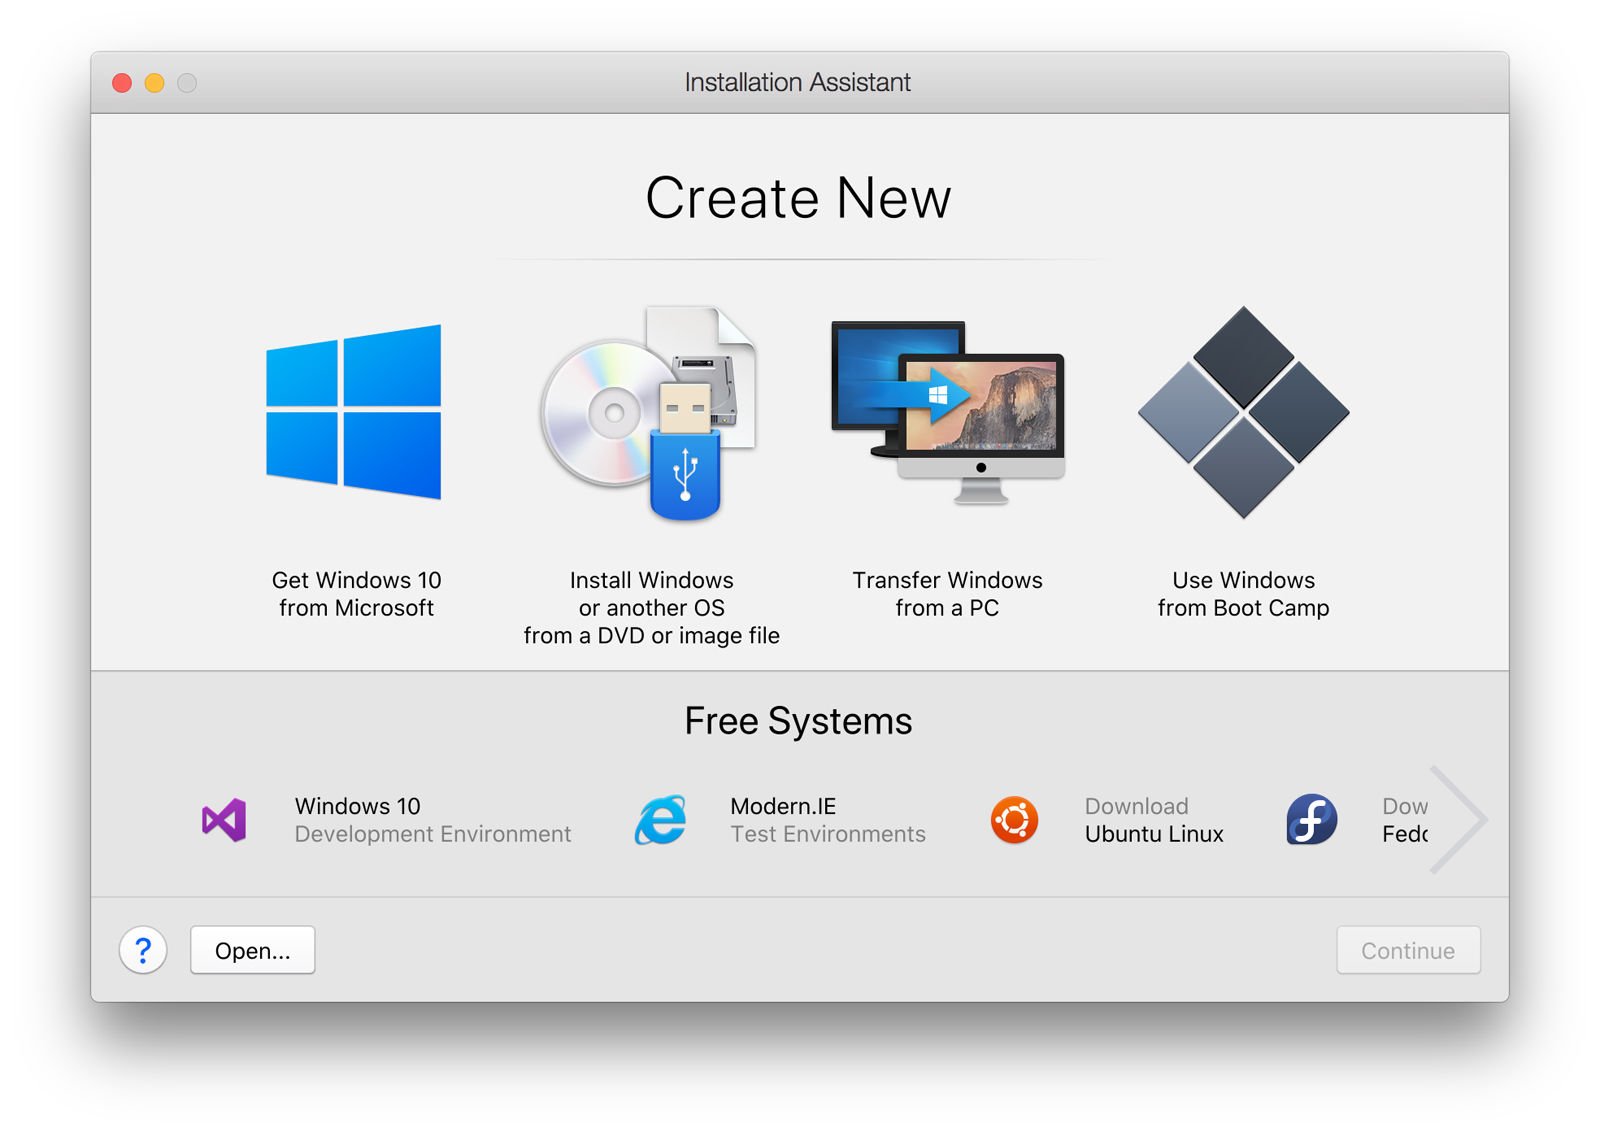 Parallels for mac download free